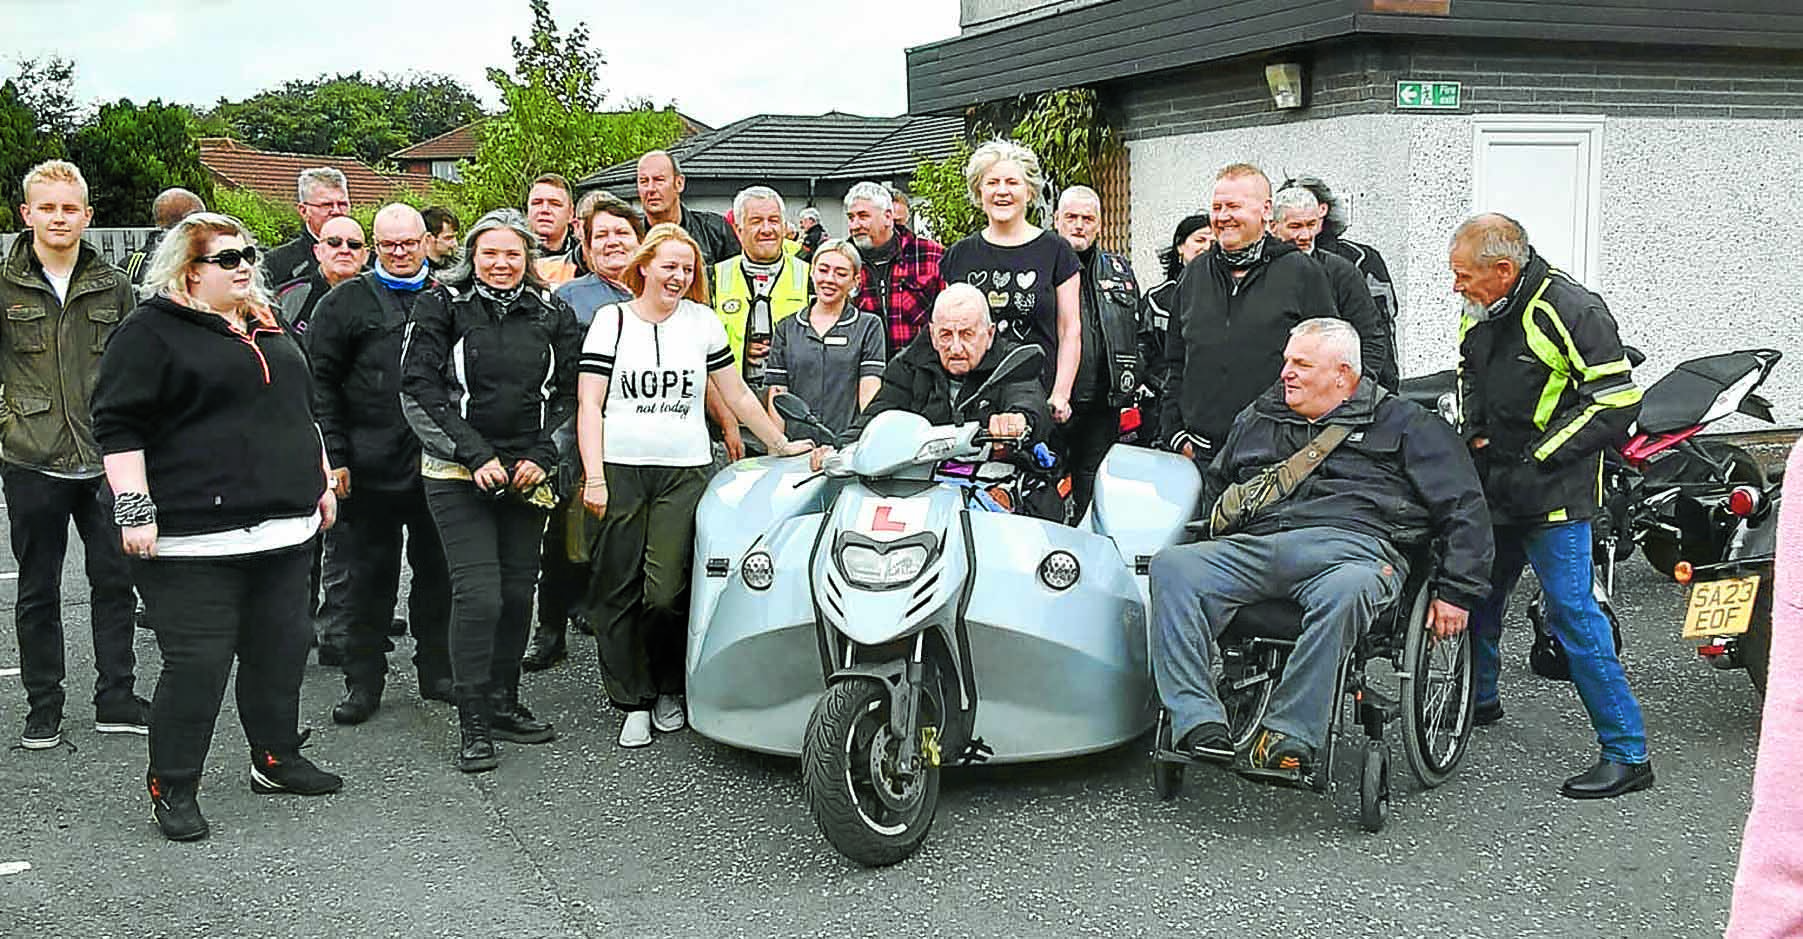 Bikers out in force for care home